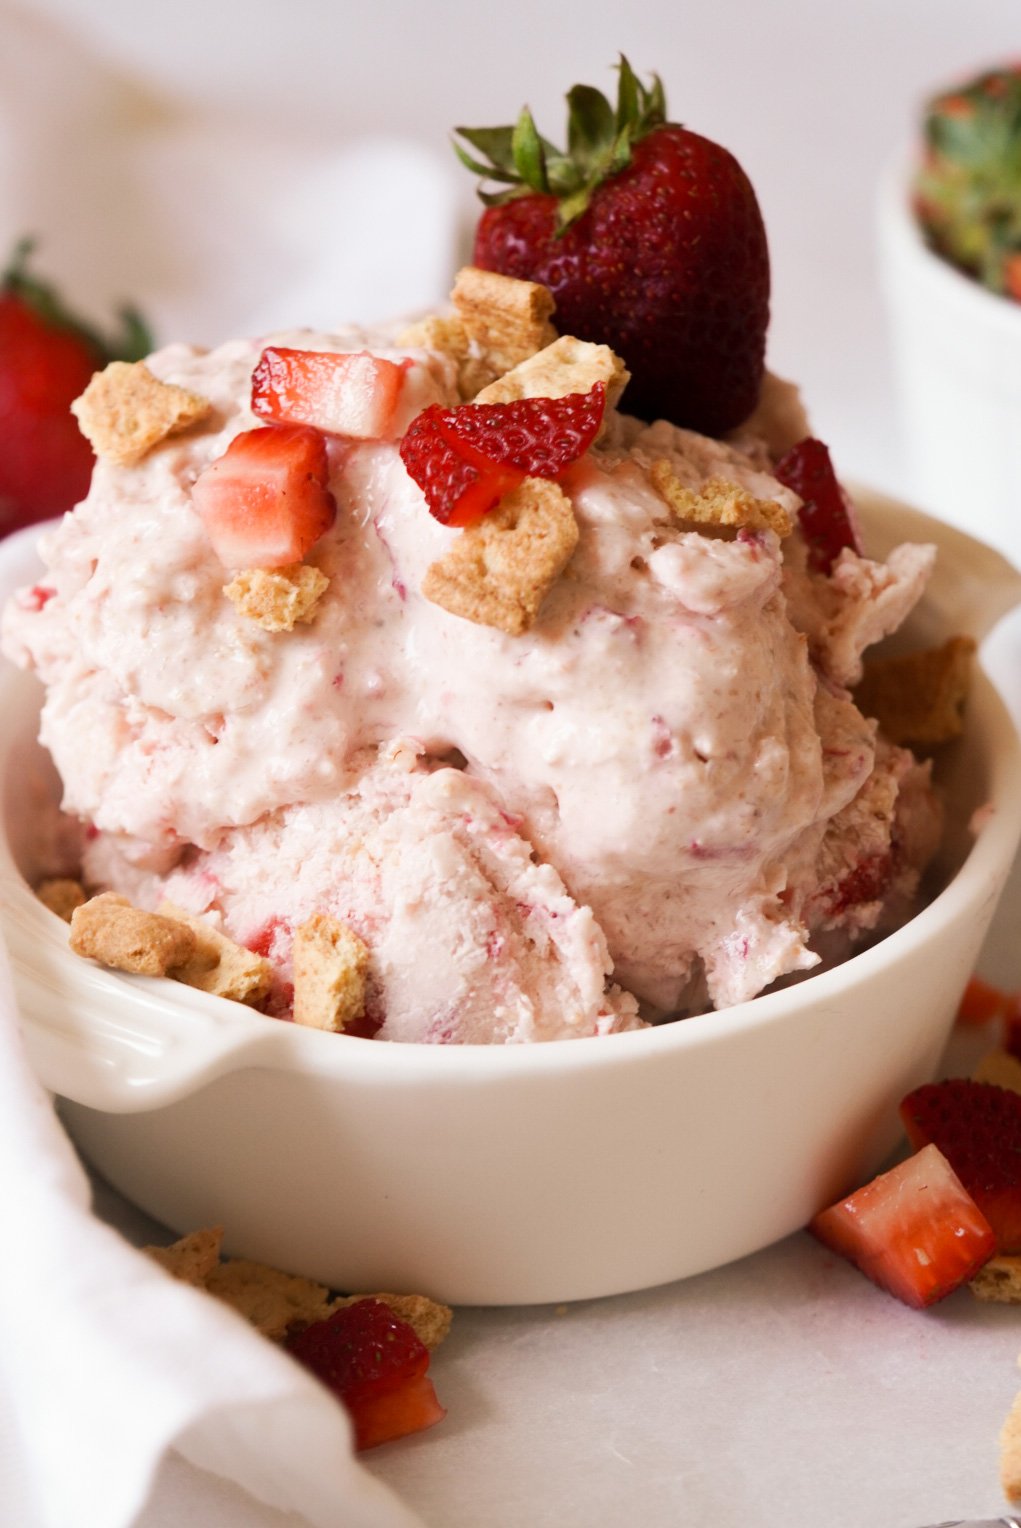 https://wellnessbykay.com/wp-content/uploads/2023/04/cottage-cheese-ice-cream-with-starwberries-and-graham-crackers.jpg